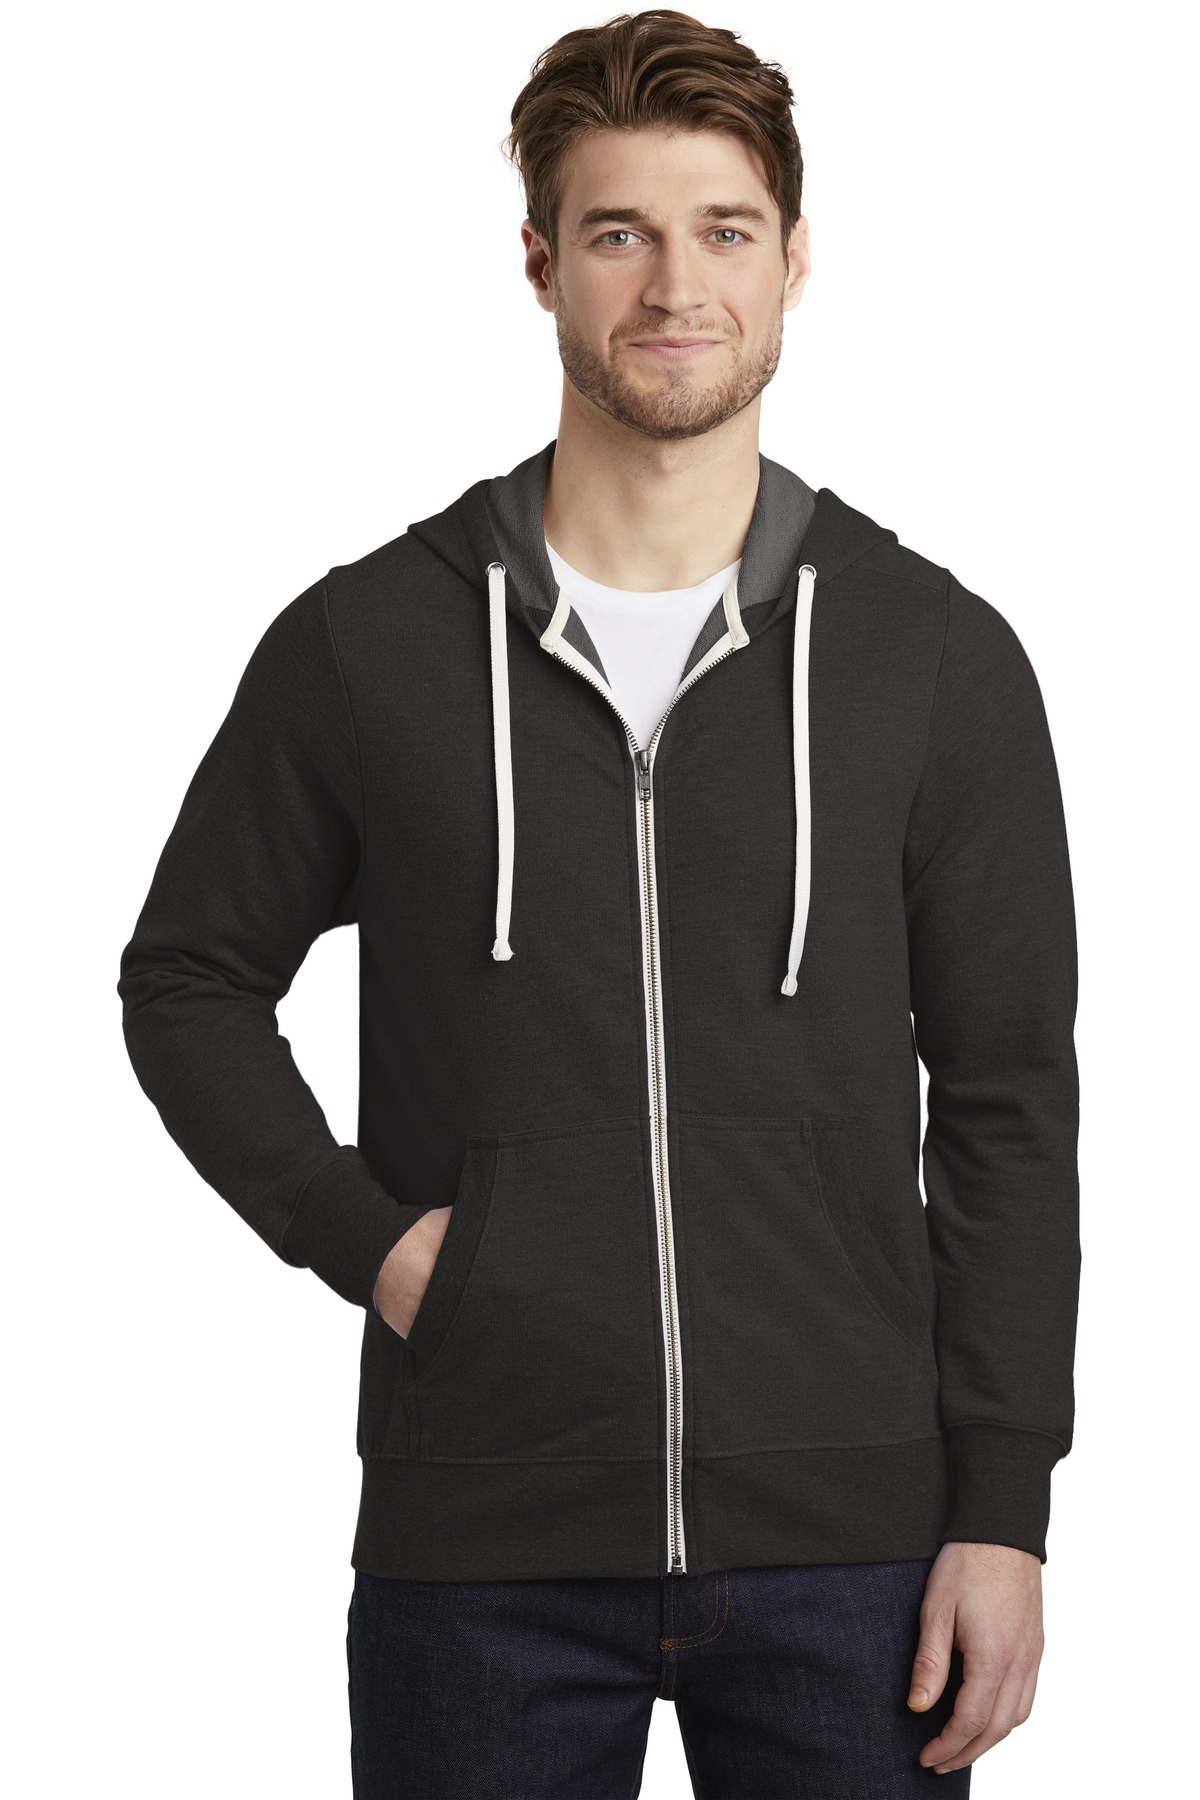 District Hospitality Sweatshirts & Fleece ® Perfect Tri ® French Terry Full-Zip Hoodie.-District